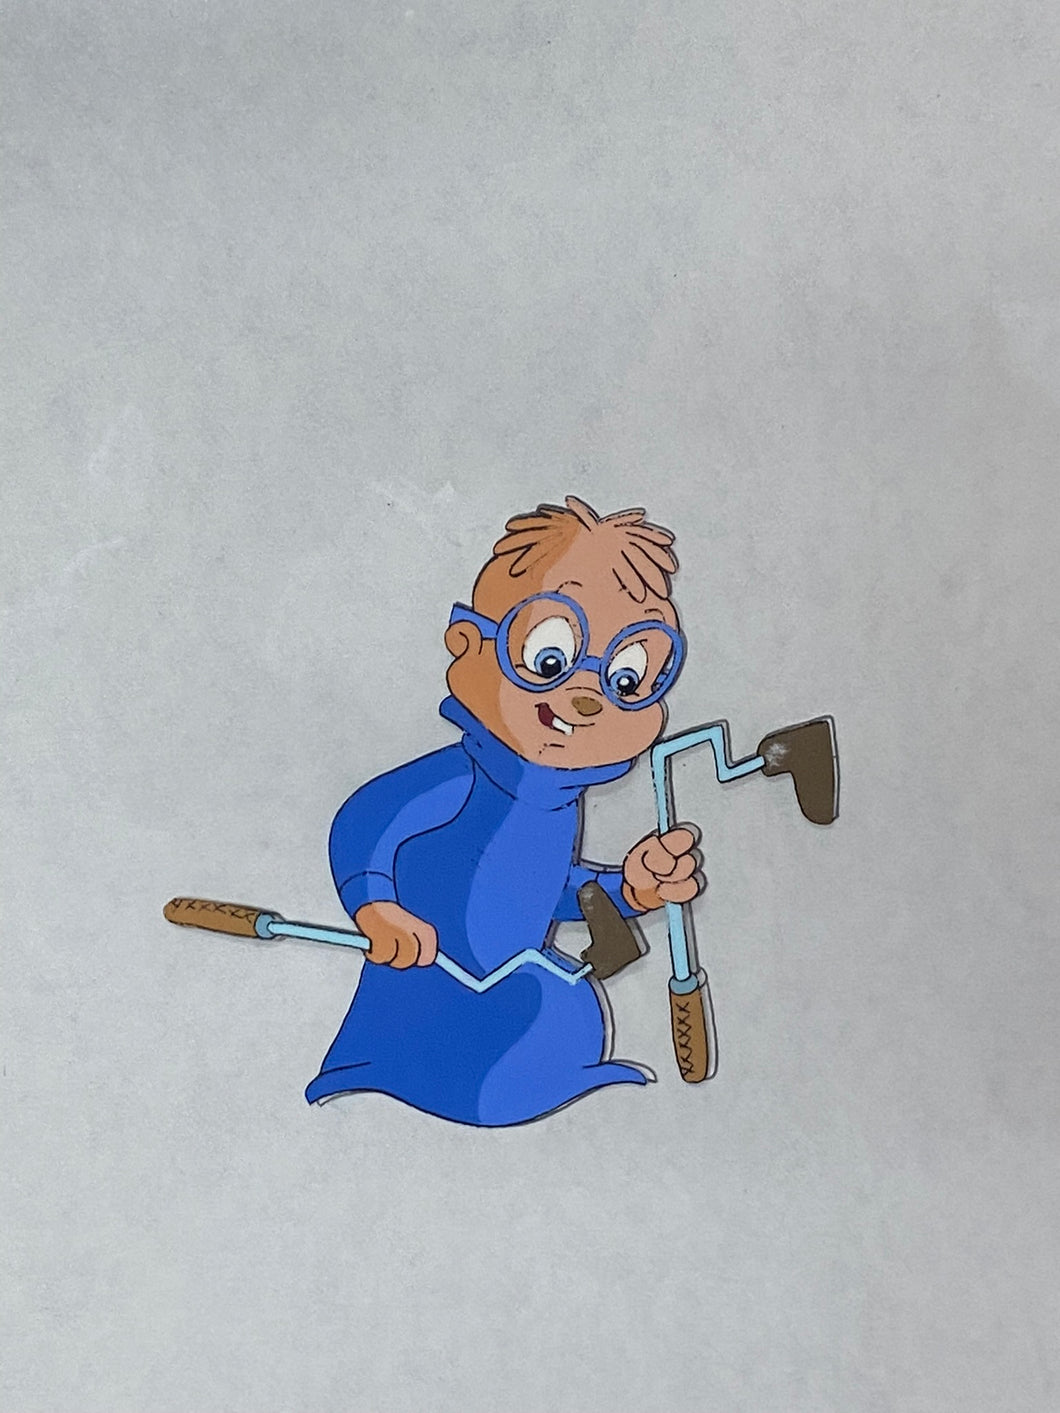 Alvin and the Chipmunks (1983 TV series) - Original animation cel and drawing